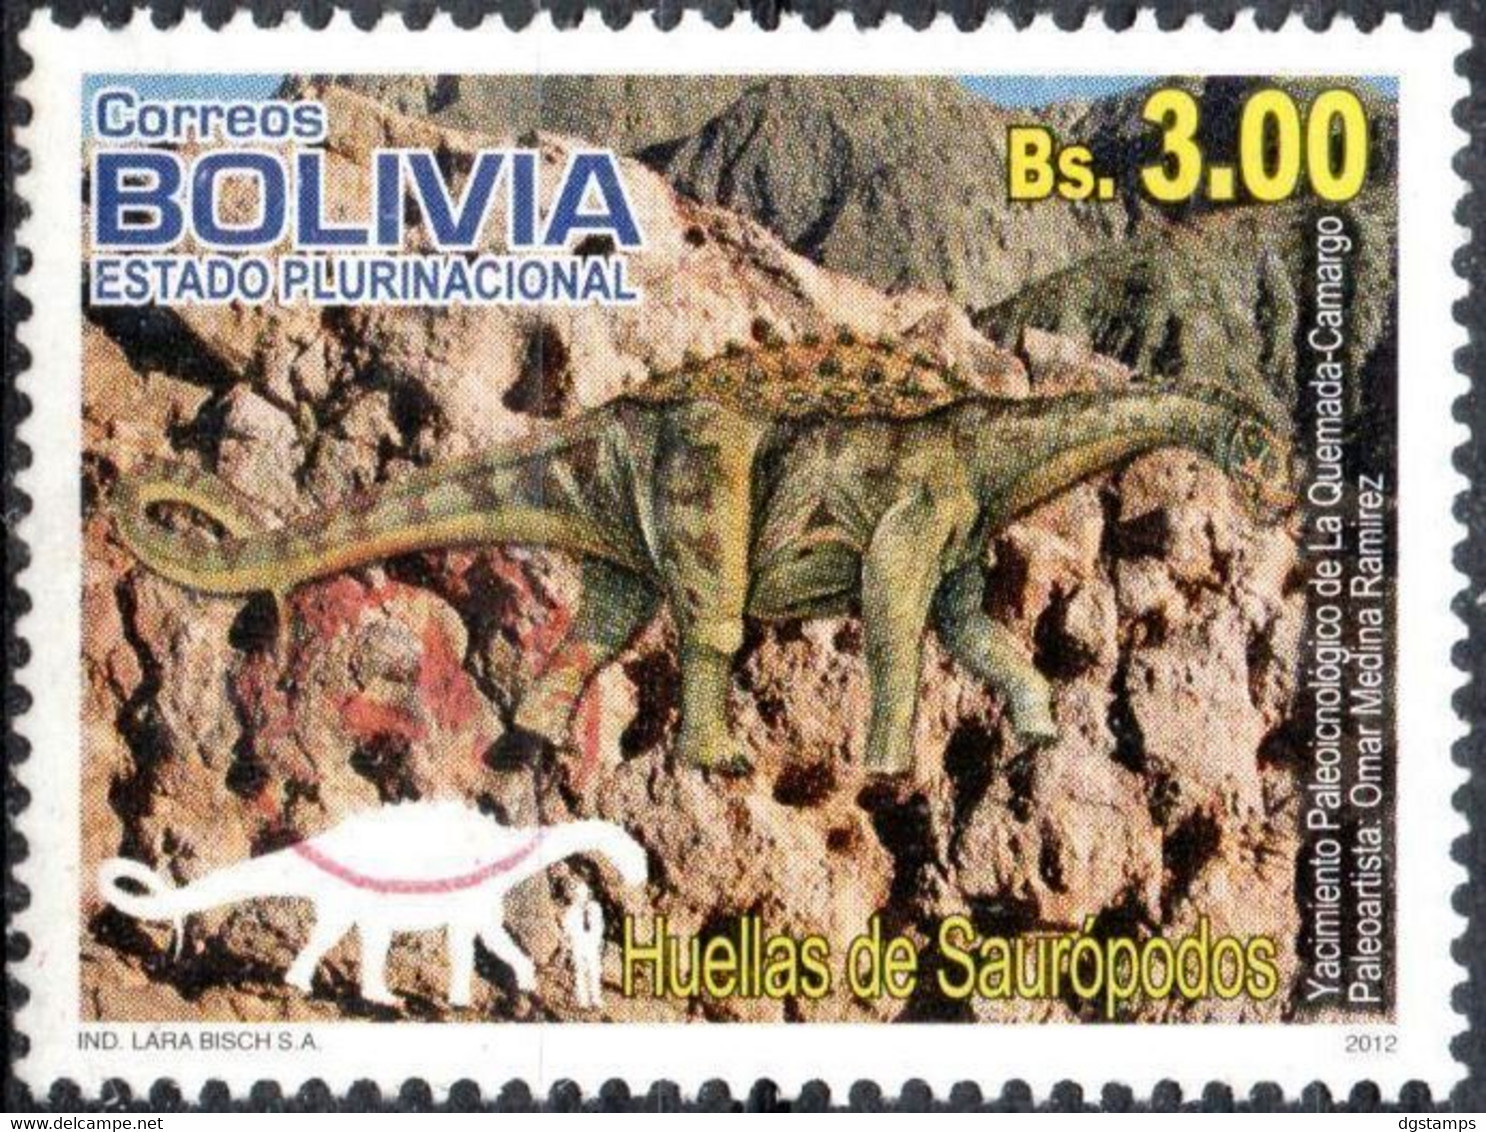 Bolivia 2018 ** CEFIBOL 2391 Issued 2012 ECOBOL CB #2145 Sauropod Footprints, AgBC Enabled. Only 100 Known. - Bolivie